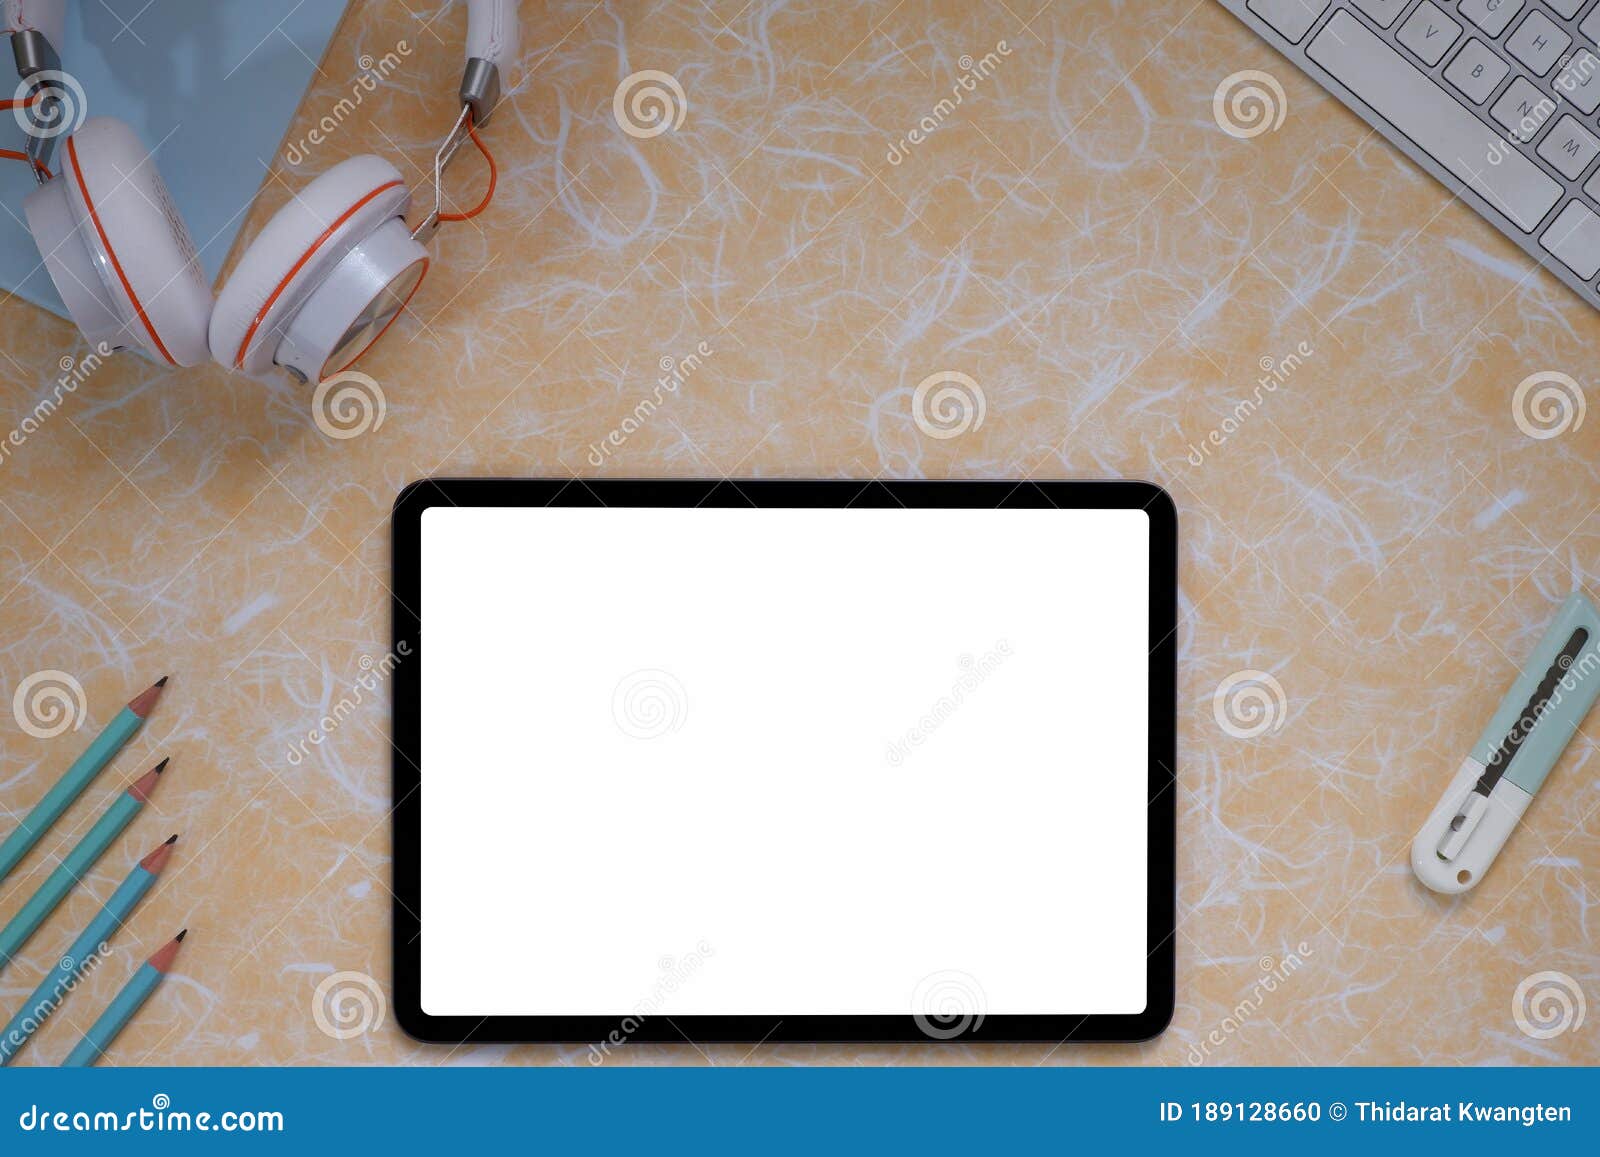 top view image of white blanks screen computer tablet with putting on colorful working desk and surrounded by pen, key borde,